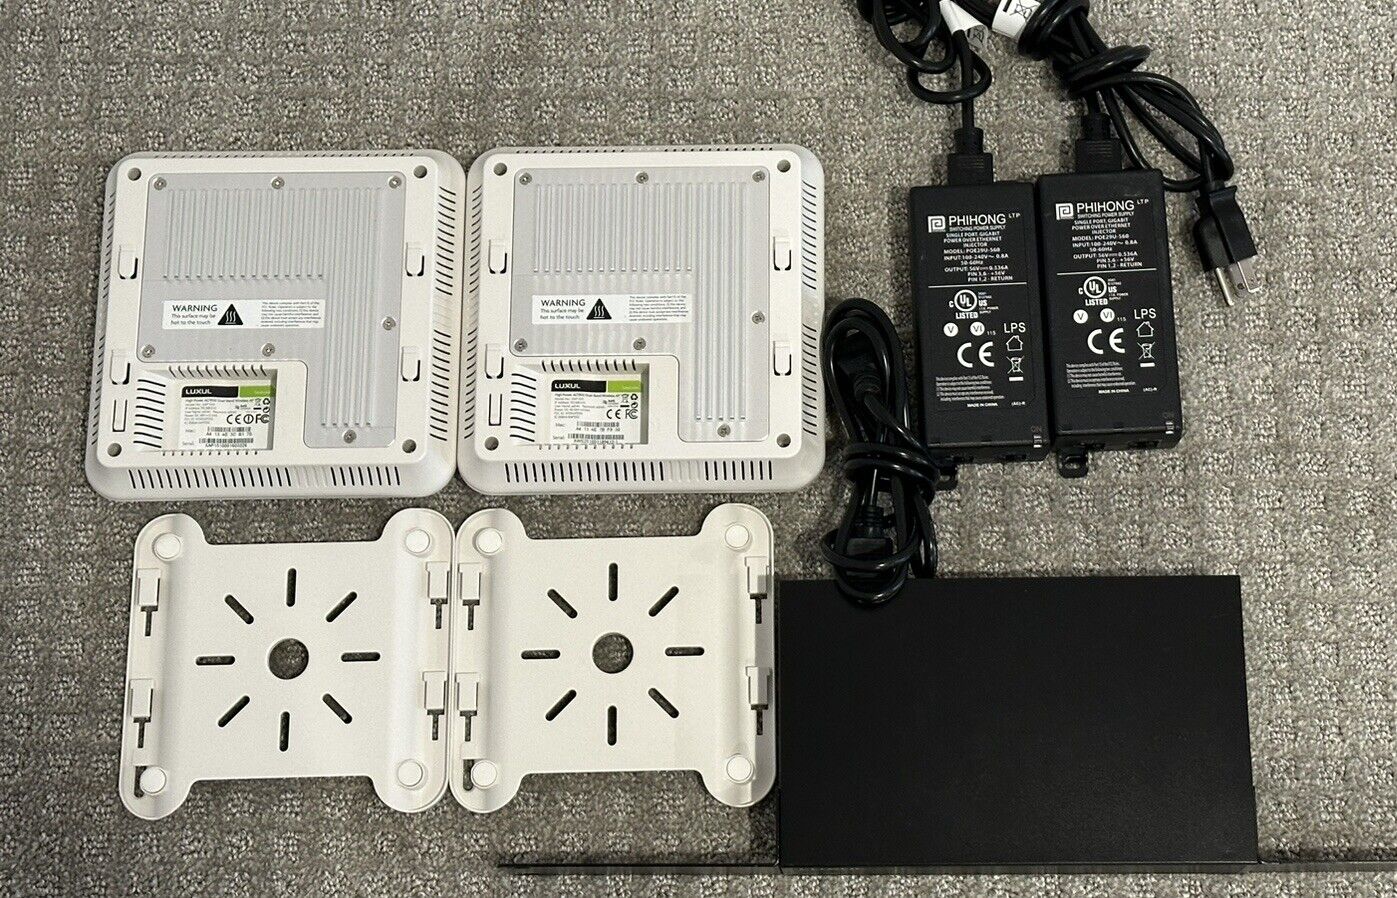 Luxul WiFi 2 x AC1900 APs 2 x Injectors and XWC-1000 Controller XWS-2510 Kit